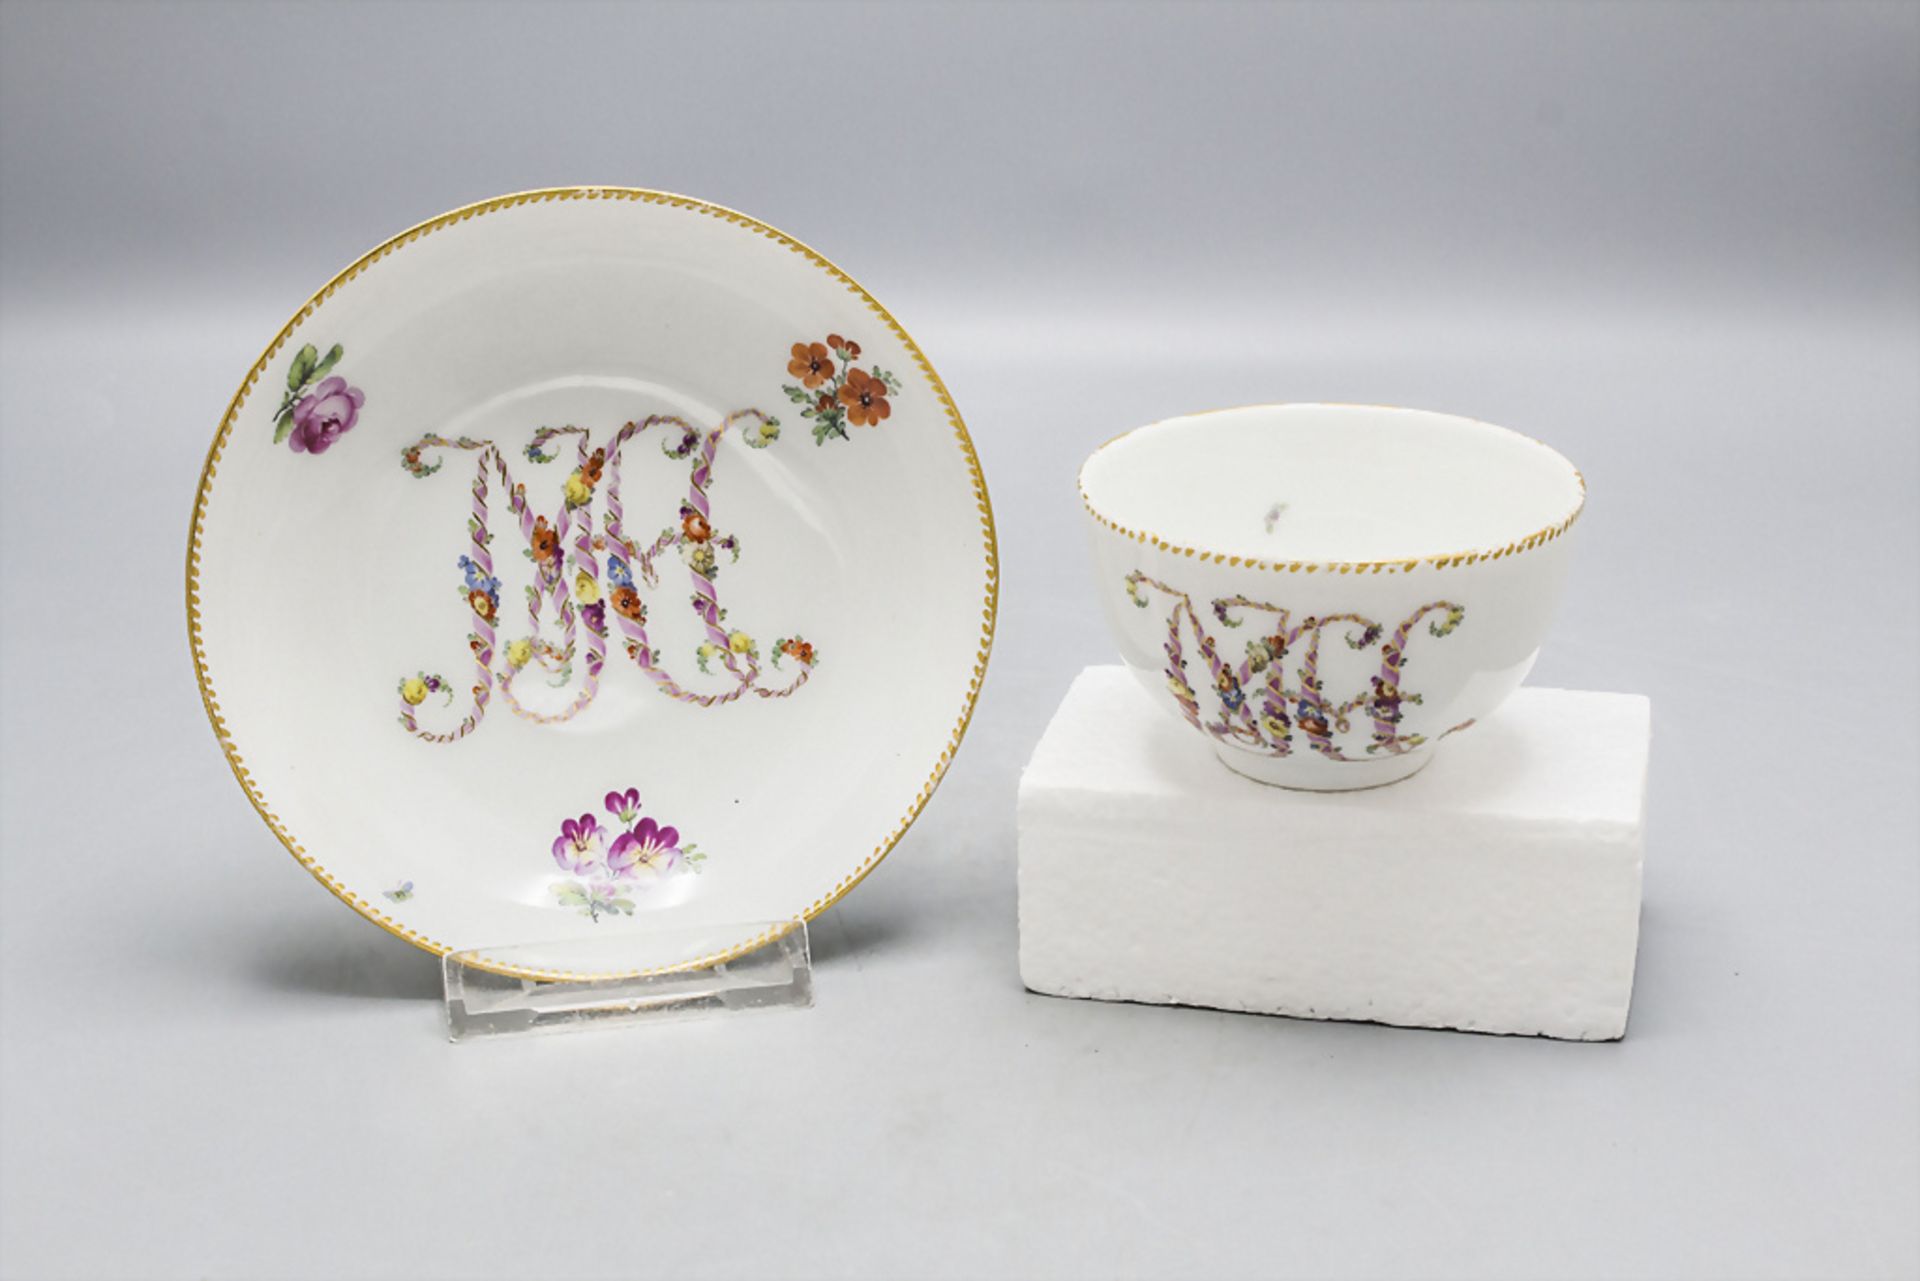 Tasse und Untertasse mit Monogramm 'MH' / A cup and saucer with letters 'MH', KPM Berlin, Ende ...